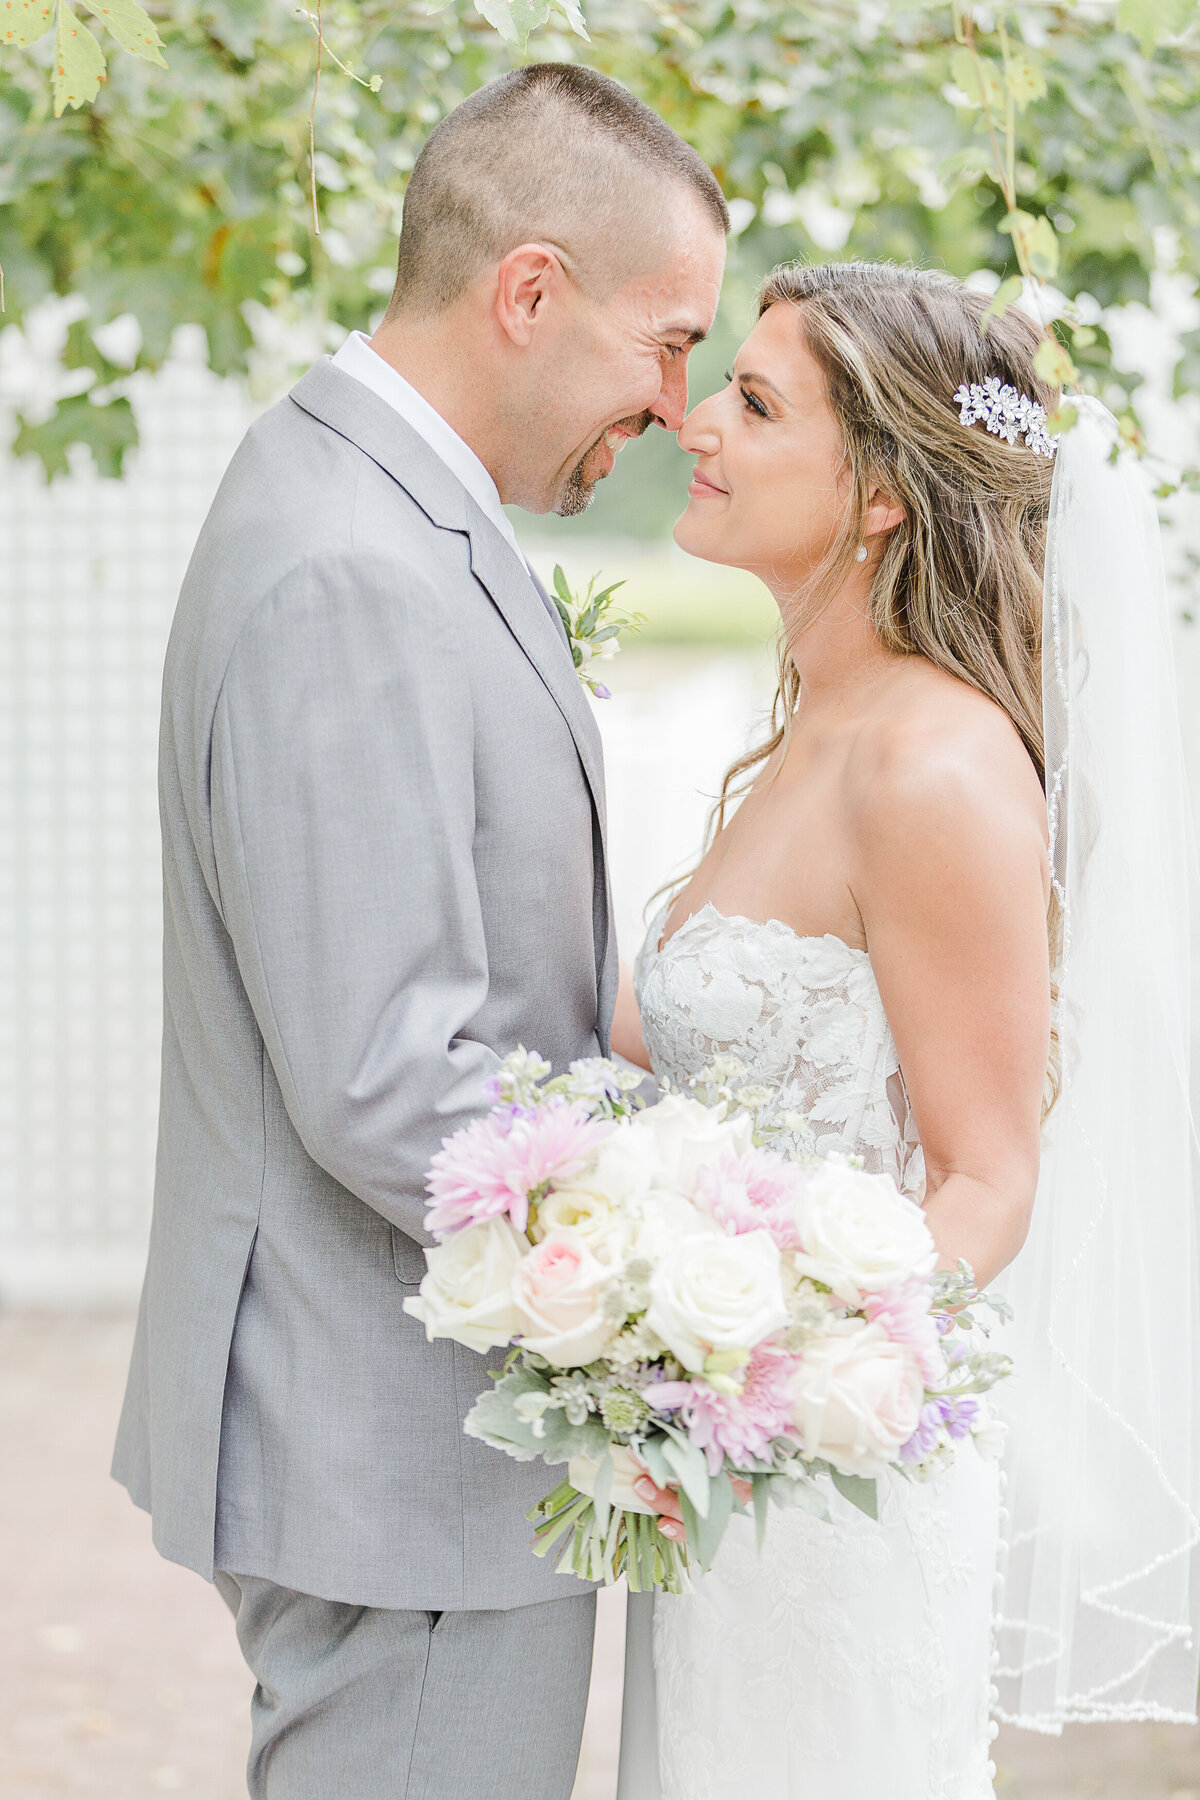 Bride and groom touch noses as they pose for a wedding portrait. Captured by best Massachusetts wedding photographer Lia Rose Weddings.